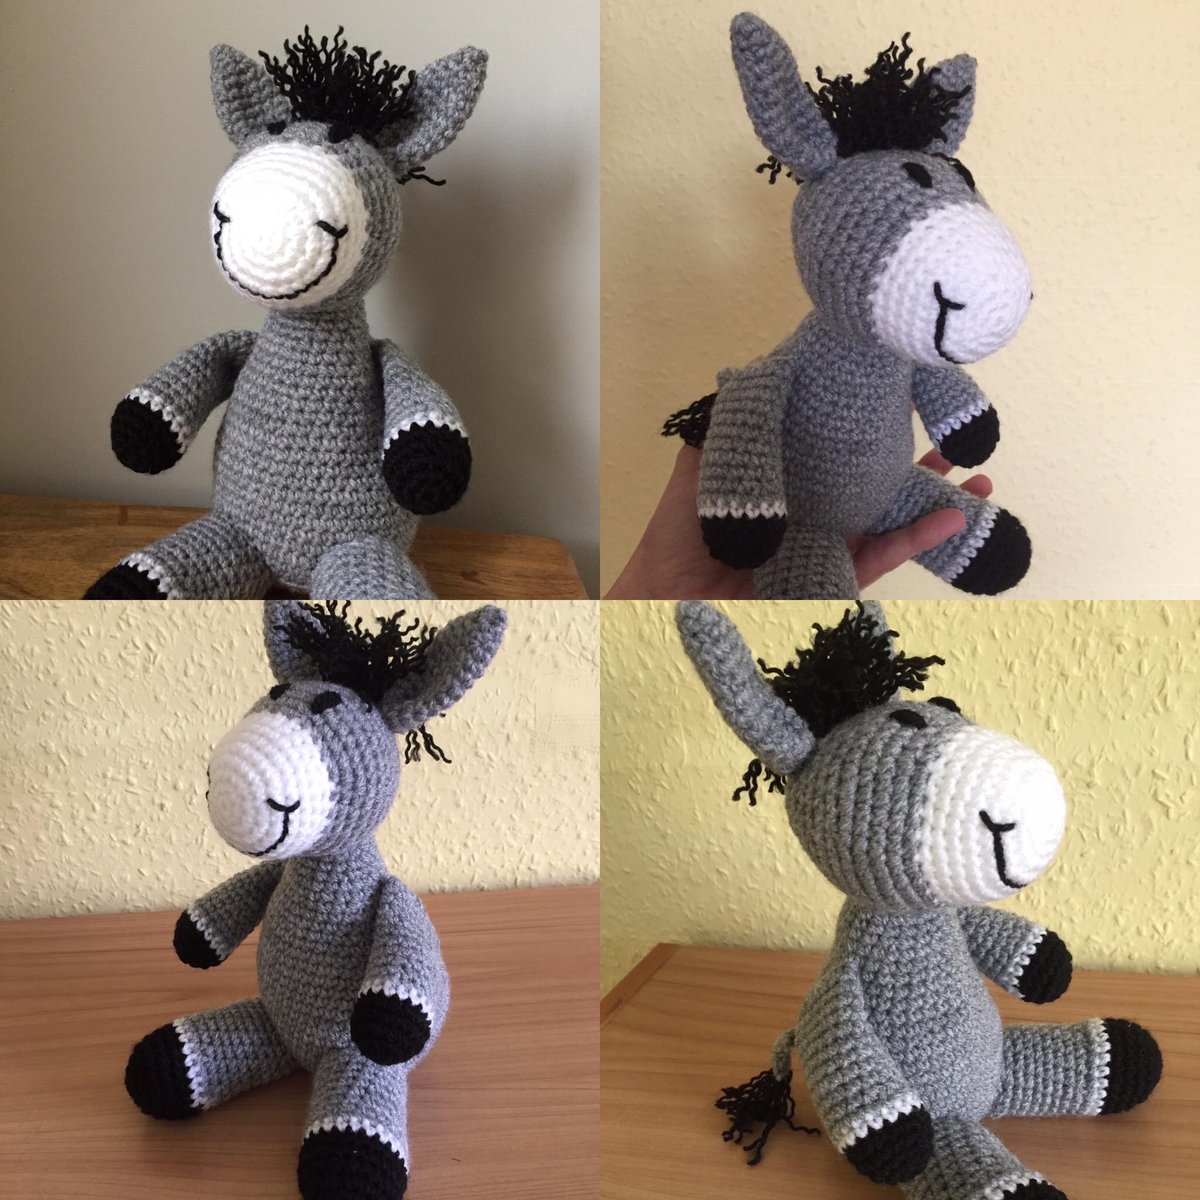 Is anyone seeking a stable companion? This little donkey is looking for his forever home. bitzas.etsy.com/listing/652099… #UKHashtags #etsy #firsttmaster #ATSocialMedia #MHHSBD